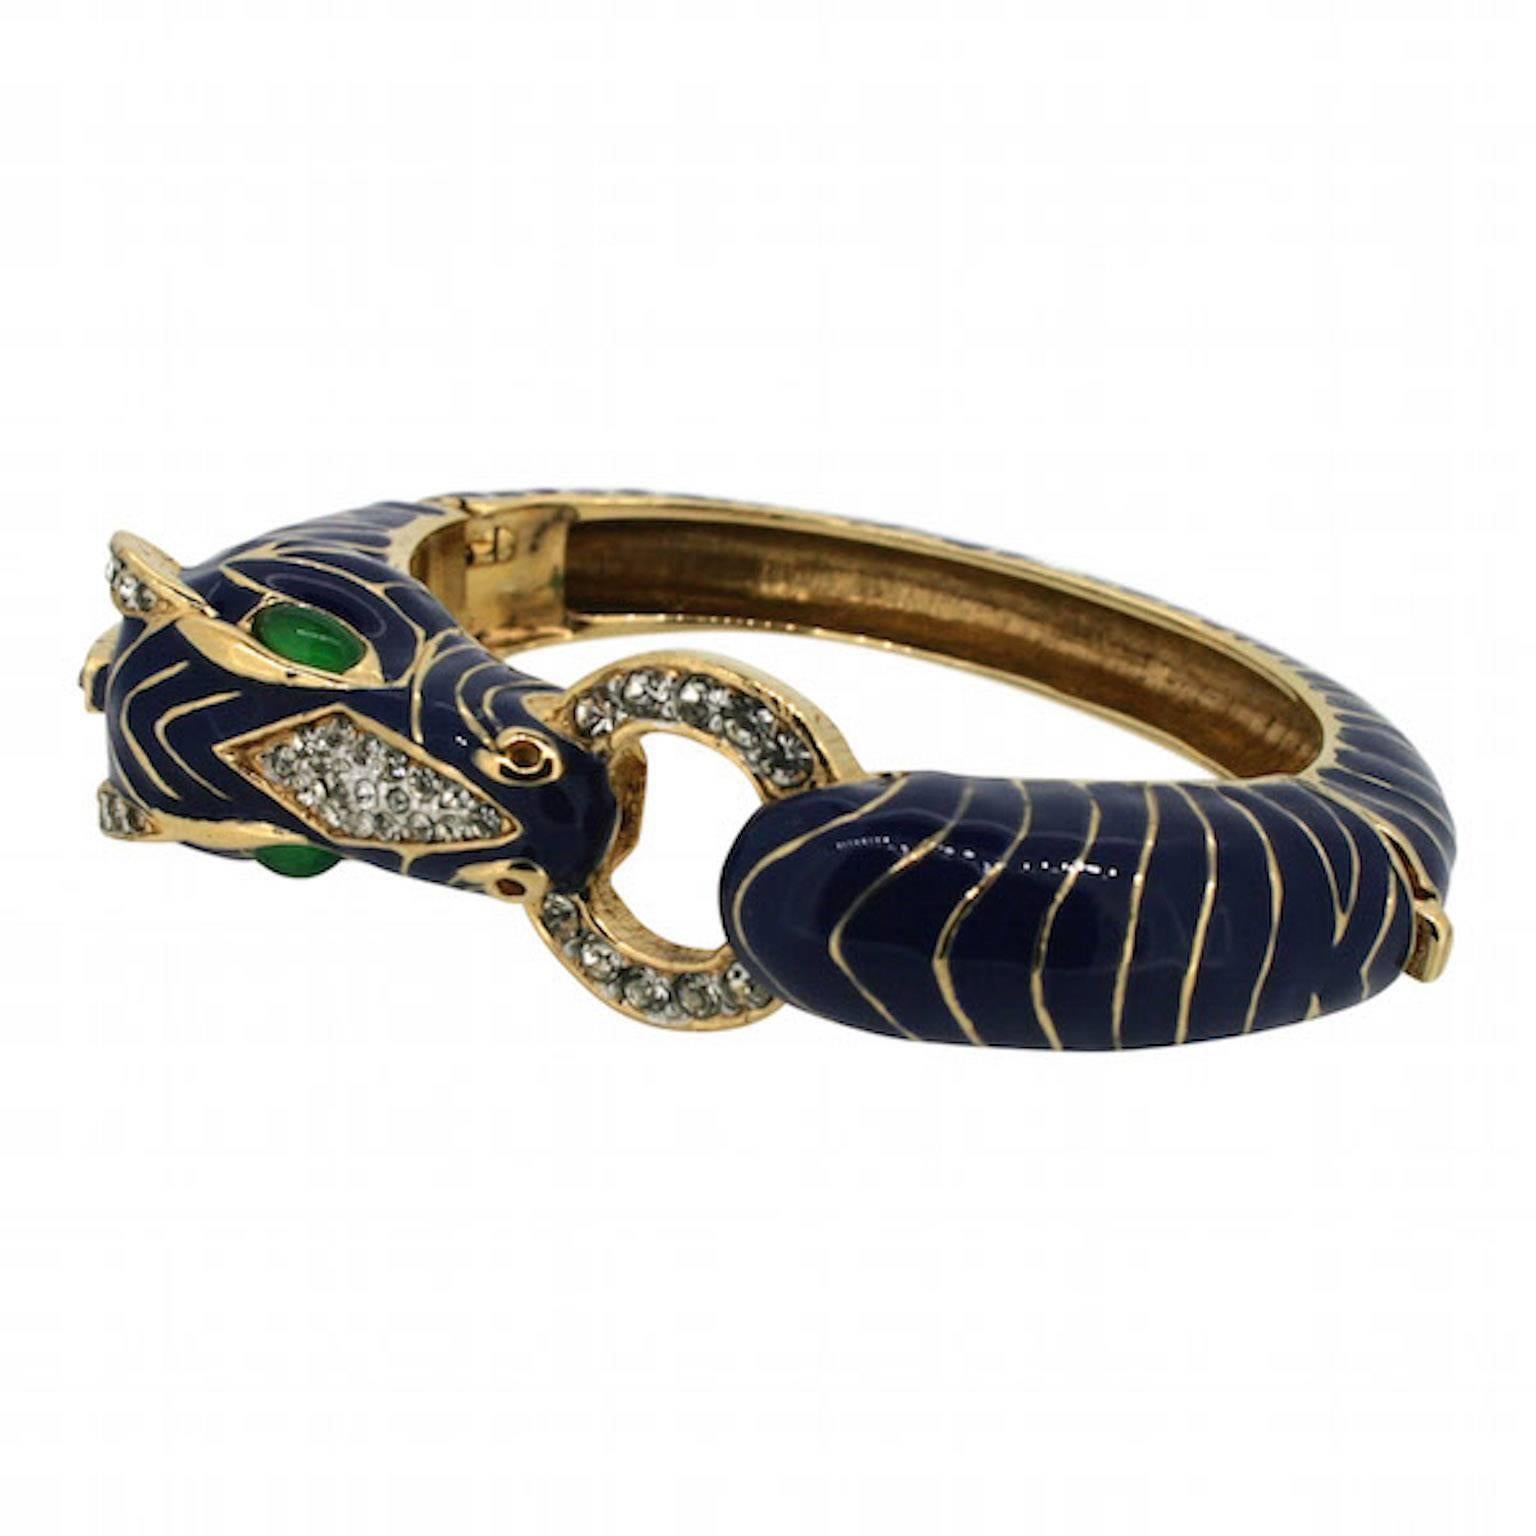 This eye-catching bangle, in a signature design by Ciner, dates from the 1980s.

Condition Report:
Excellent 

The Details...
This gold plated bangle features the Ciner company's signature 'Zebra' design. It features navy enamelling and is detailed